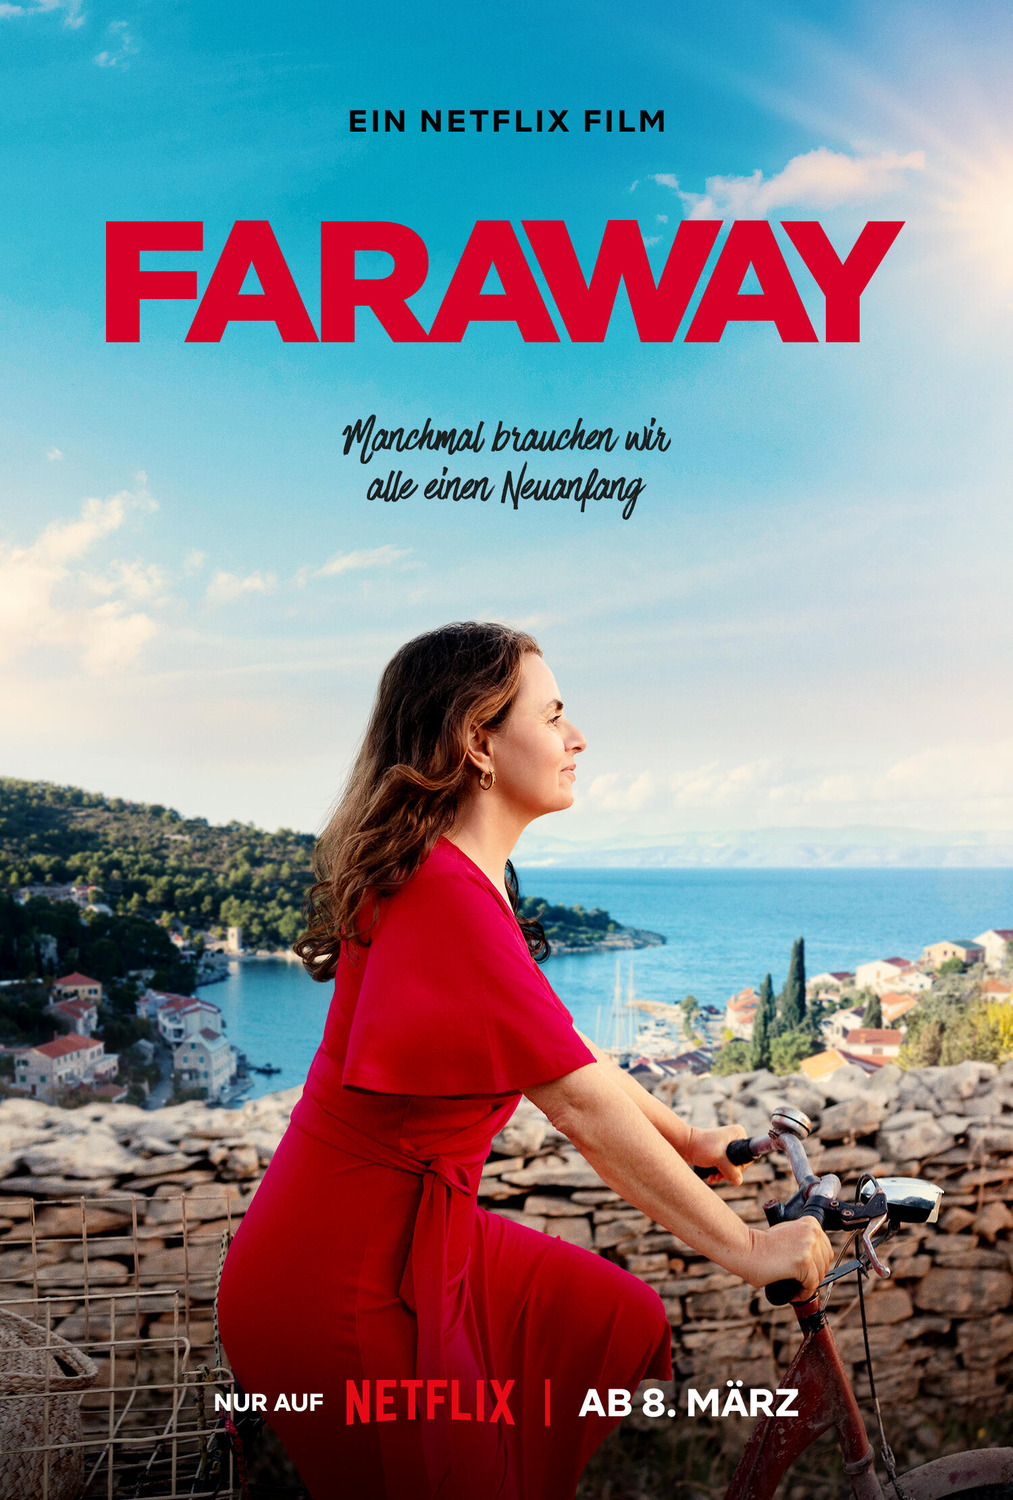 Extra Large Movie Poster Image for Faraway 